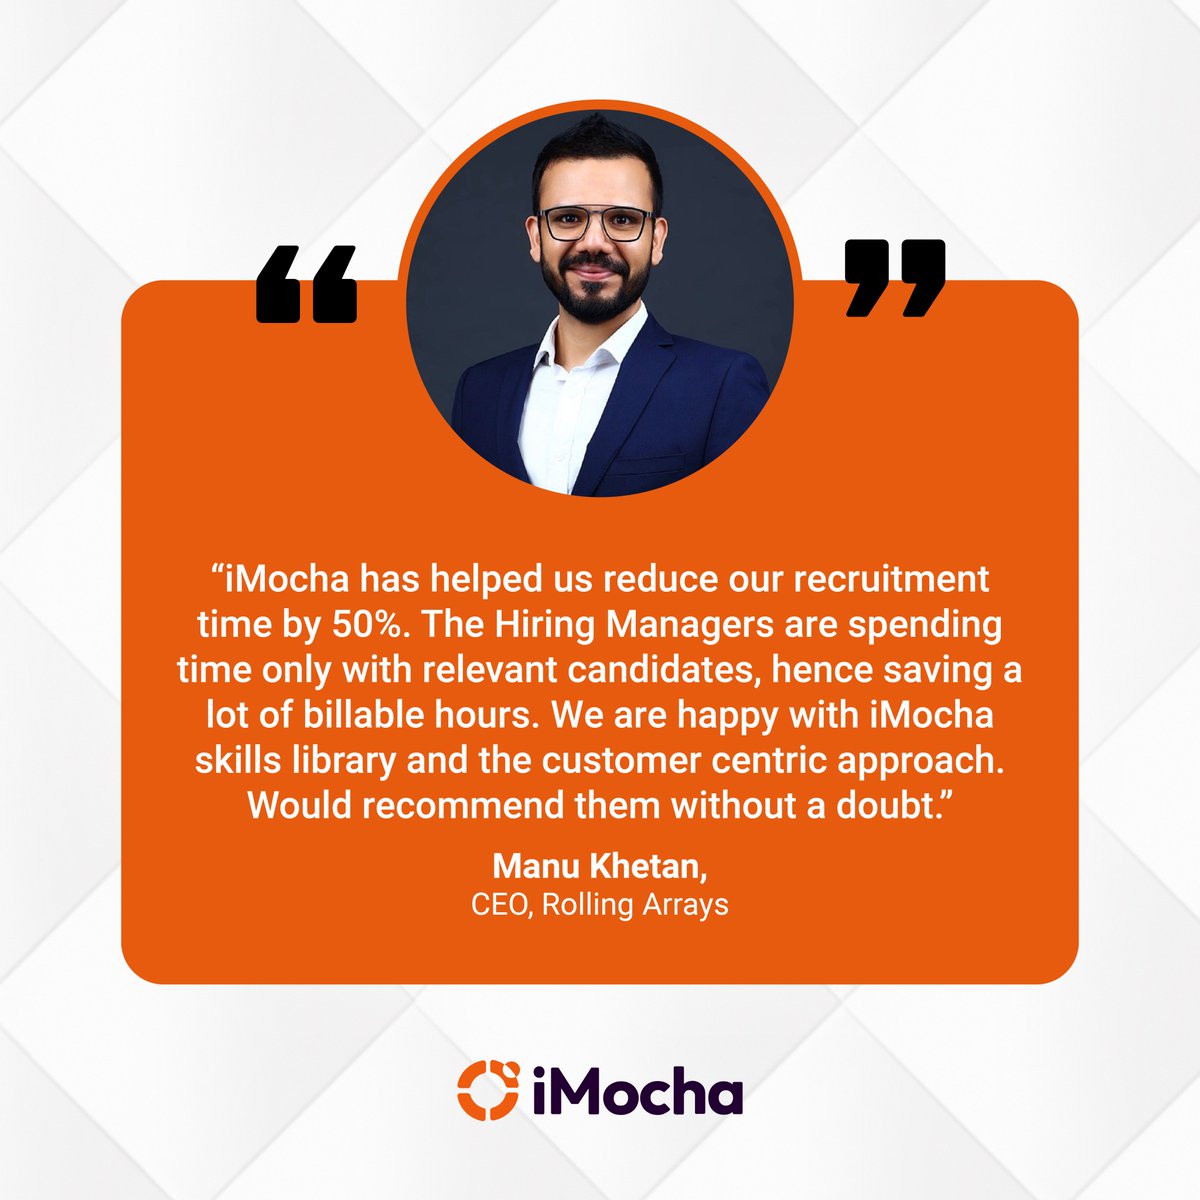 Manu Khetan, CEO of @RollingArrays, shares his experience with iMocha, and how our innovative skills validation solution cut their recruitment time in half. 

#ClientTestimonial #SuccessStory #TalentAcquisition #SkillsAssessment